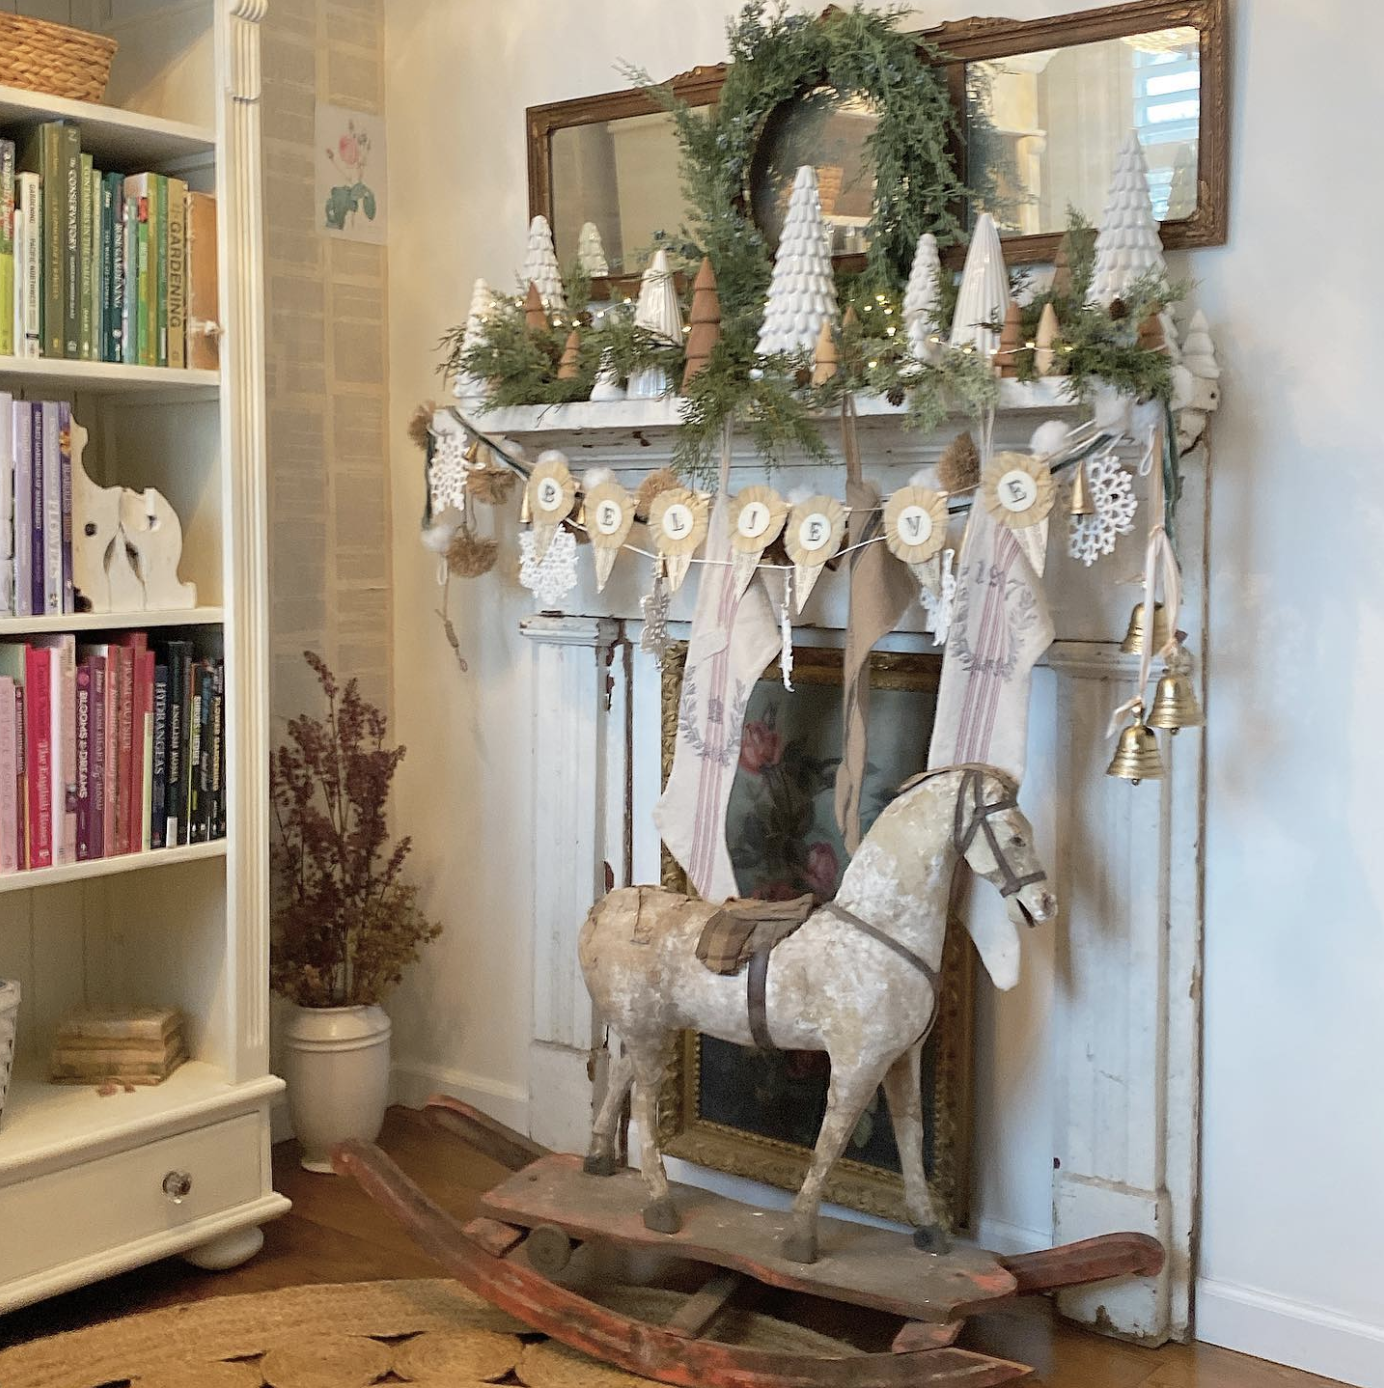 Antique rocking horse Christmas mantel - love the ceramic and wood trees mixed together